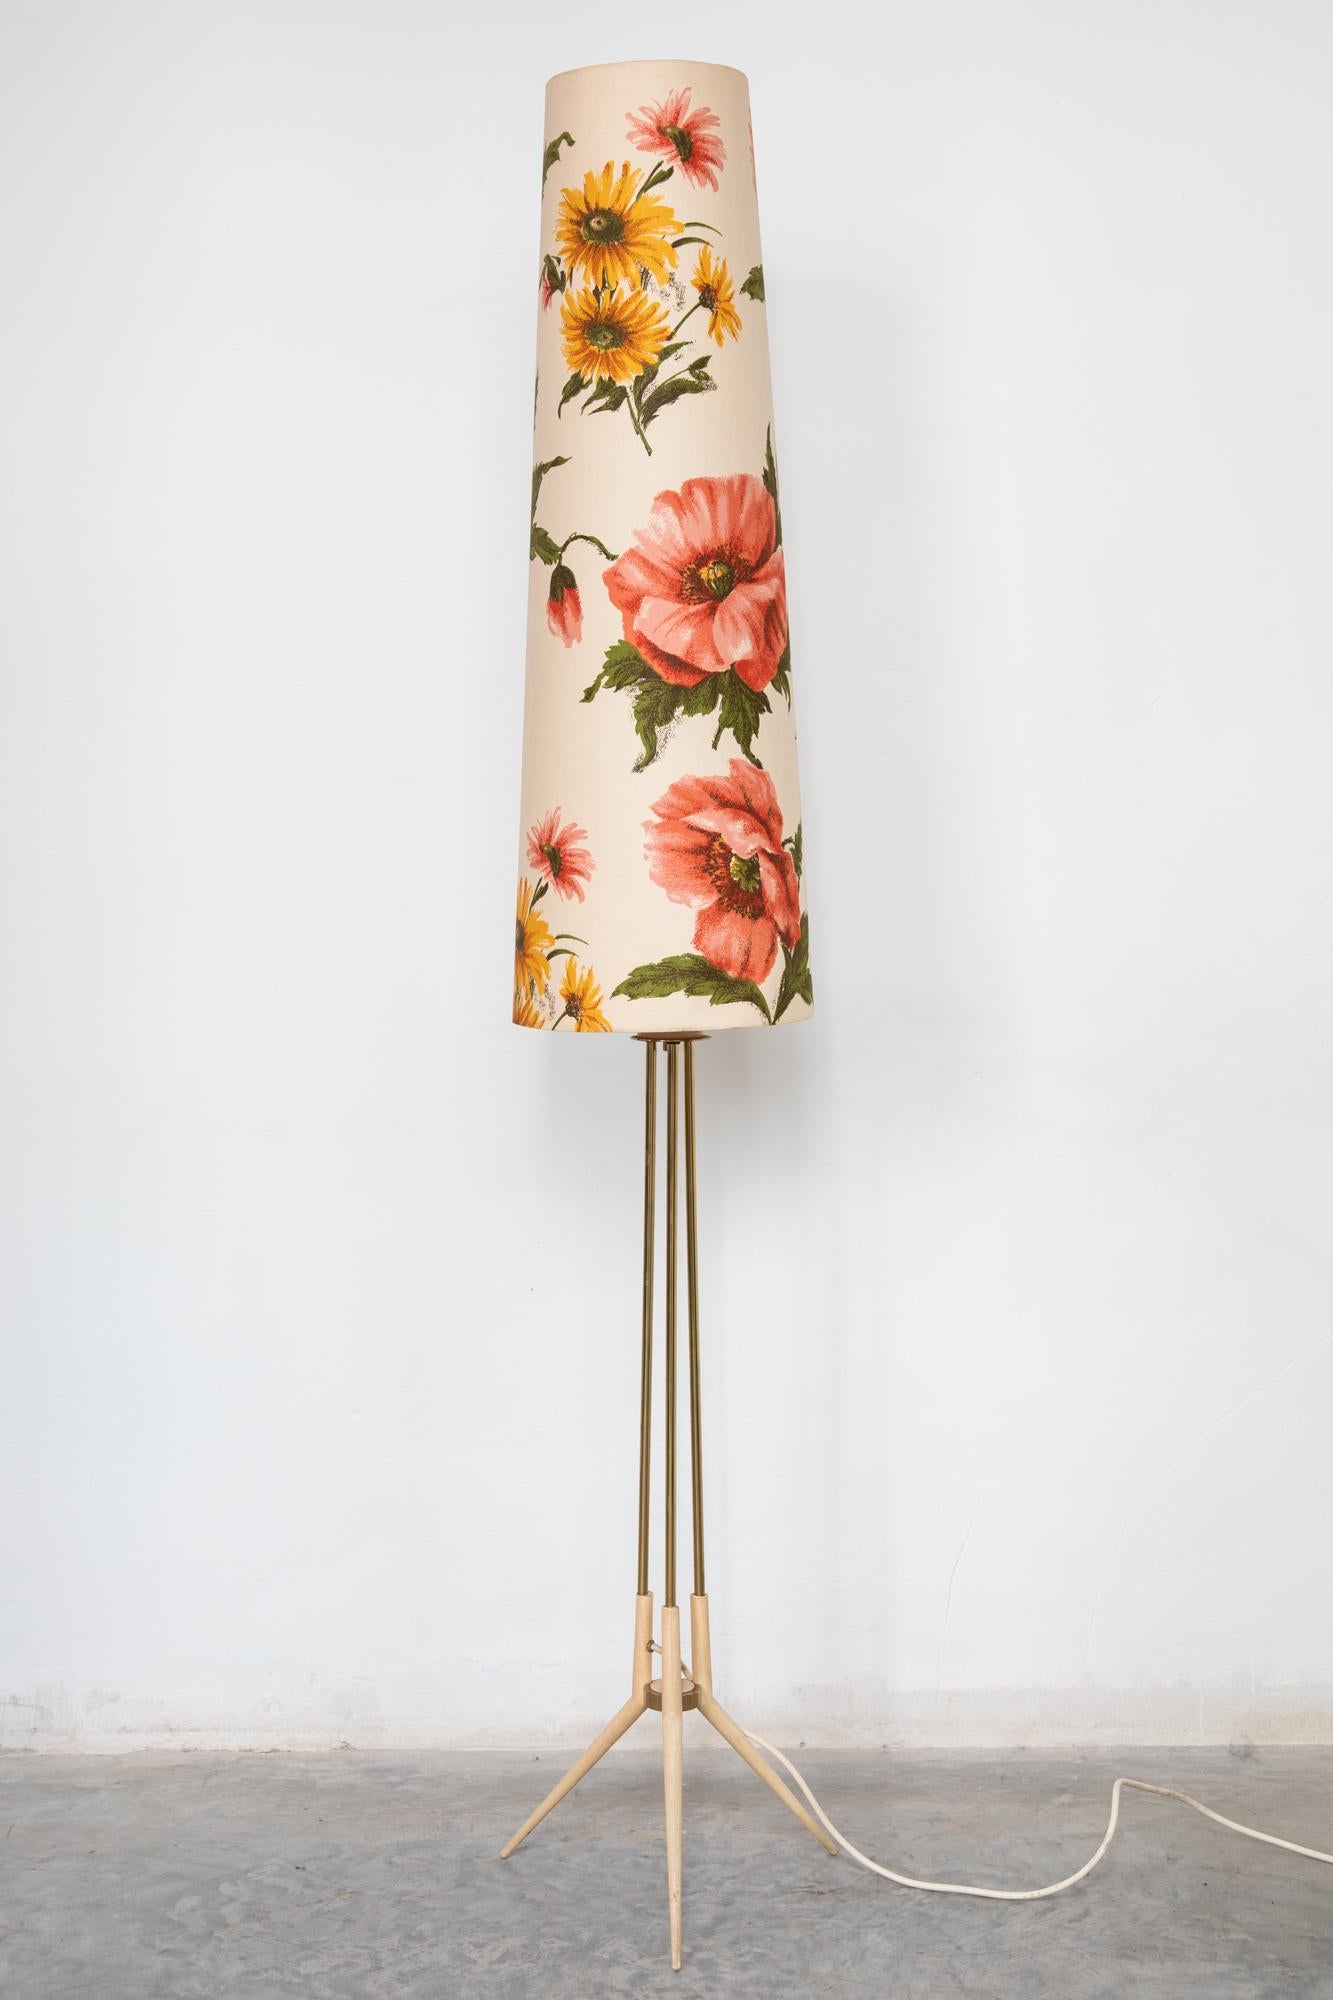 Vintage Midcentury floor lamp with hair pin base. Tall shade features a vibrant design of peonies and sunflowers, Italy, 1950s.

Measures: Base 30 W x 150 H x 30 D cm.
Shade:20 W x 80 H x 20 D cm.